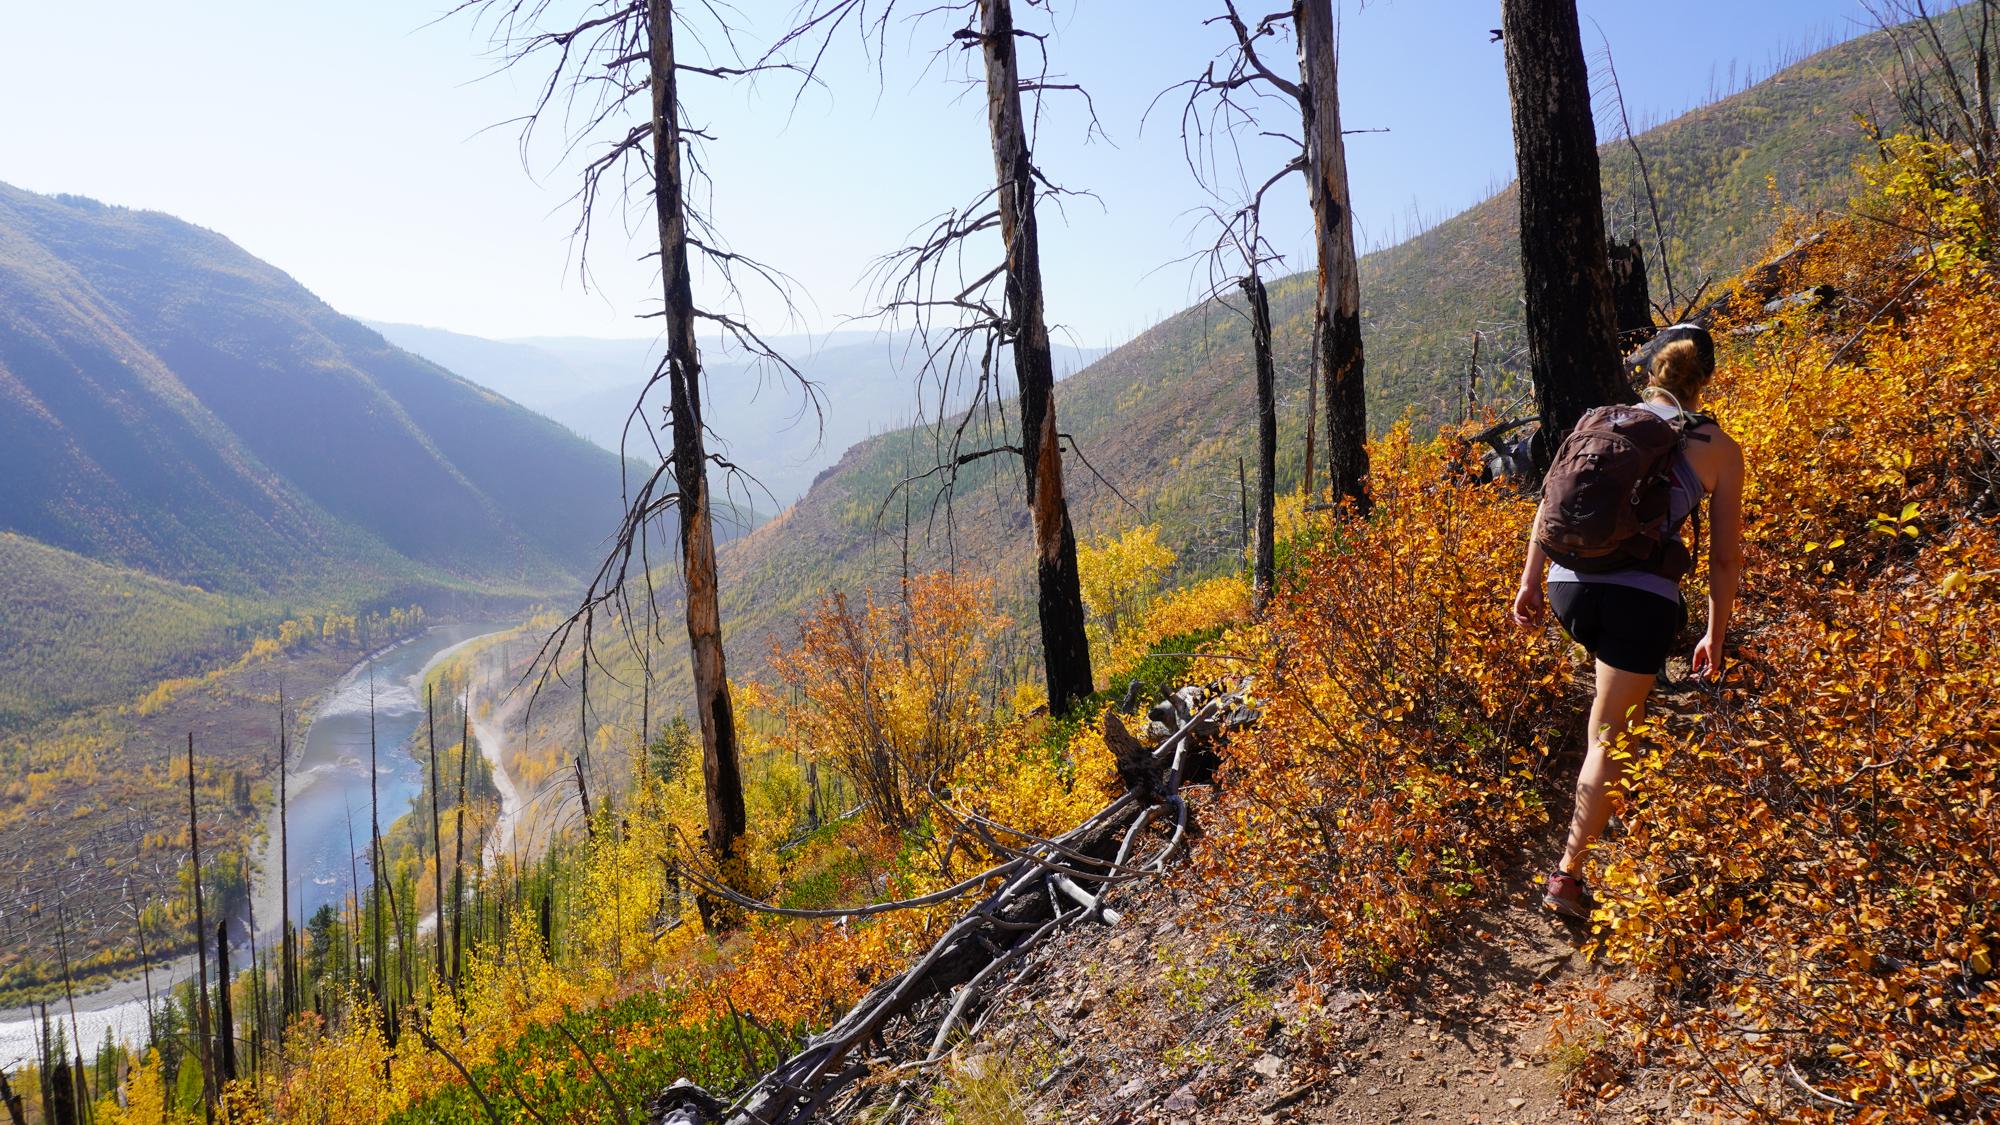 Fall colors peak from late September through mid-October // Demers Ridge Trail heading up Glacier View Mountain.